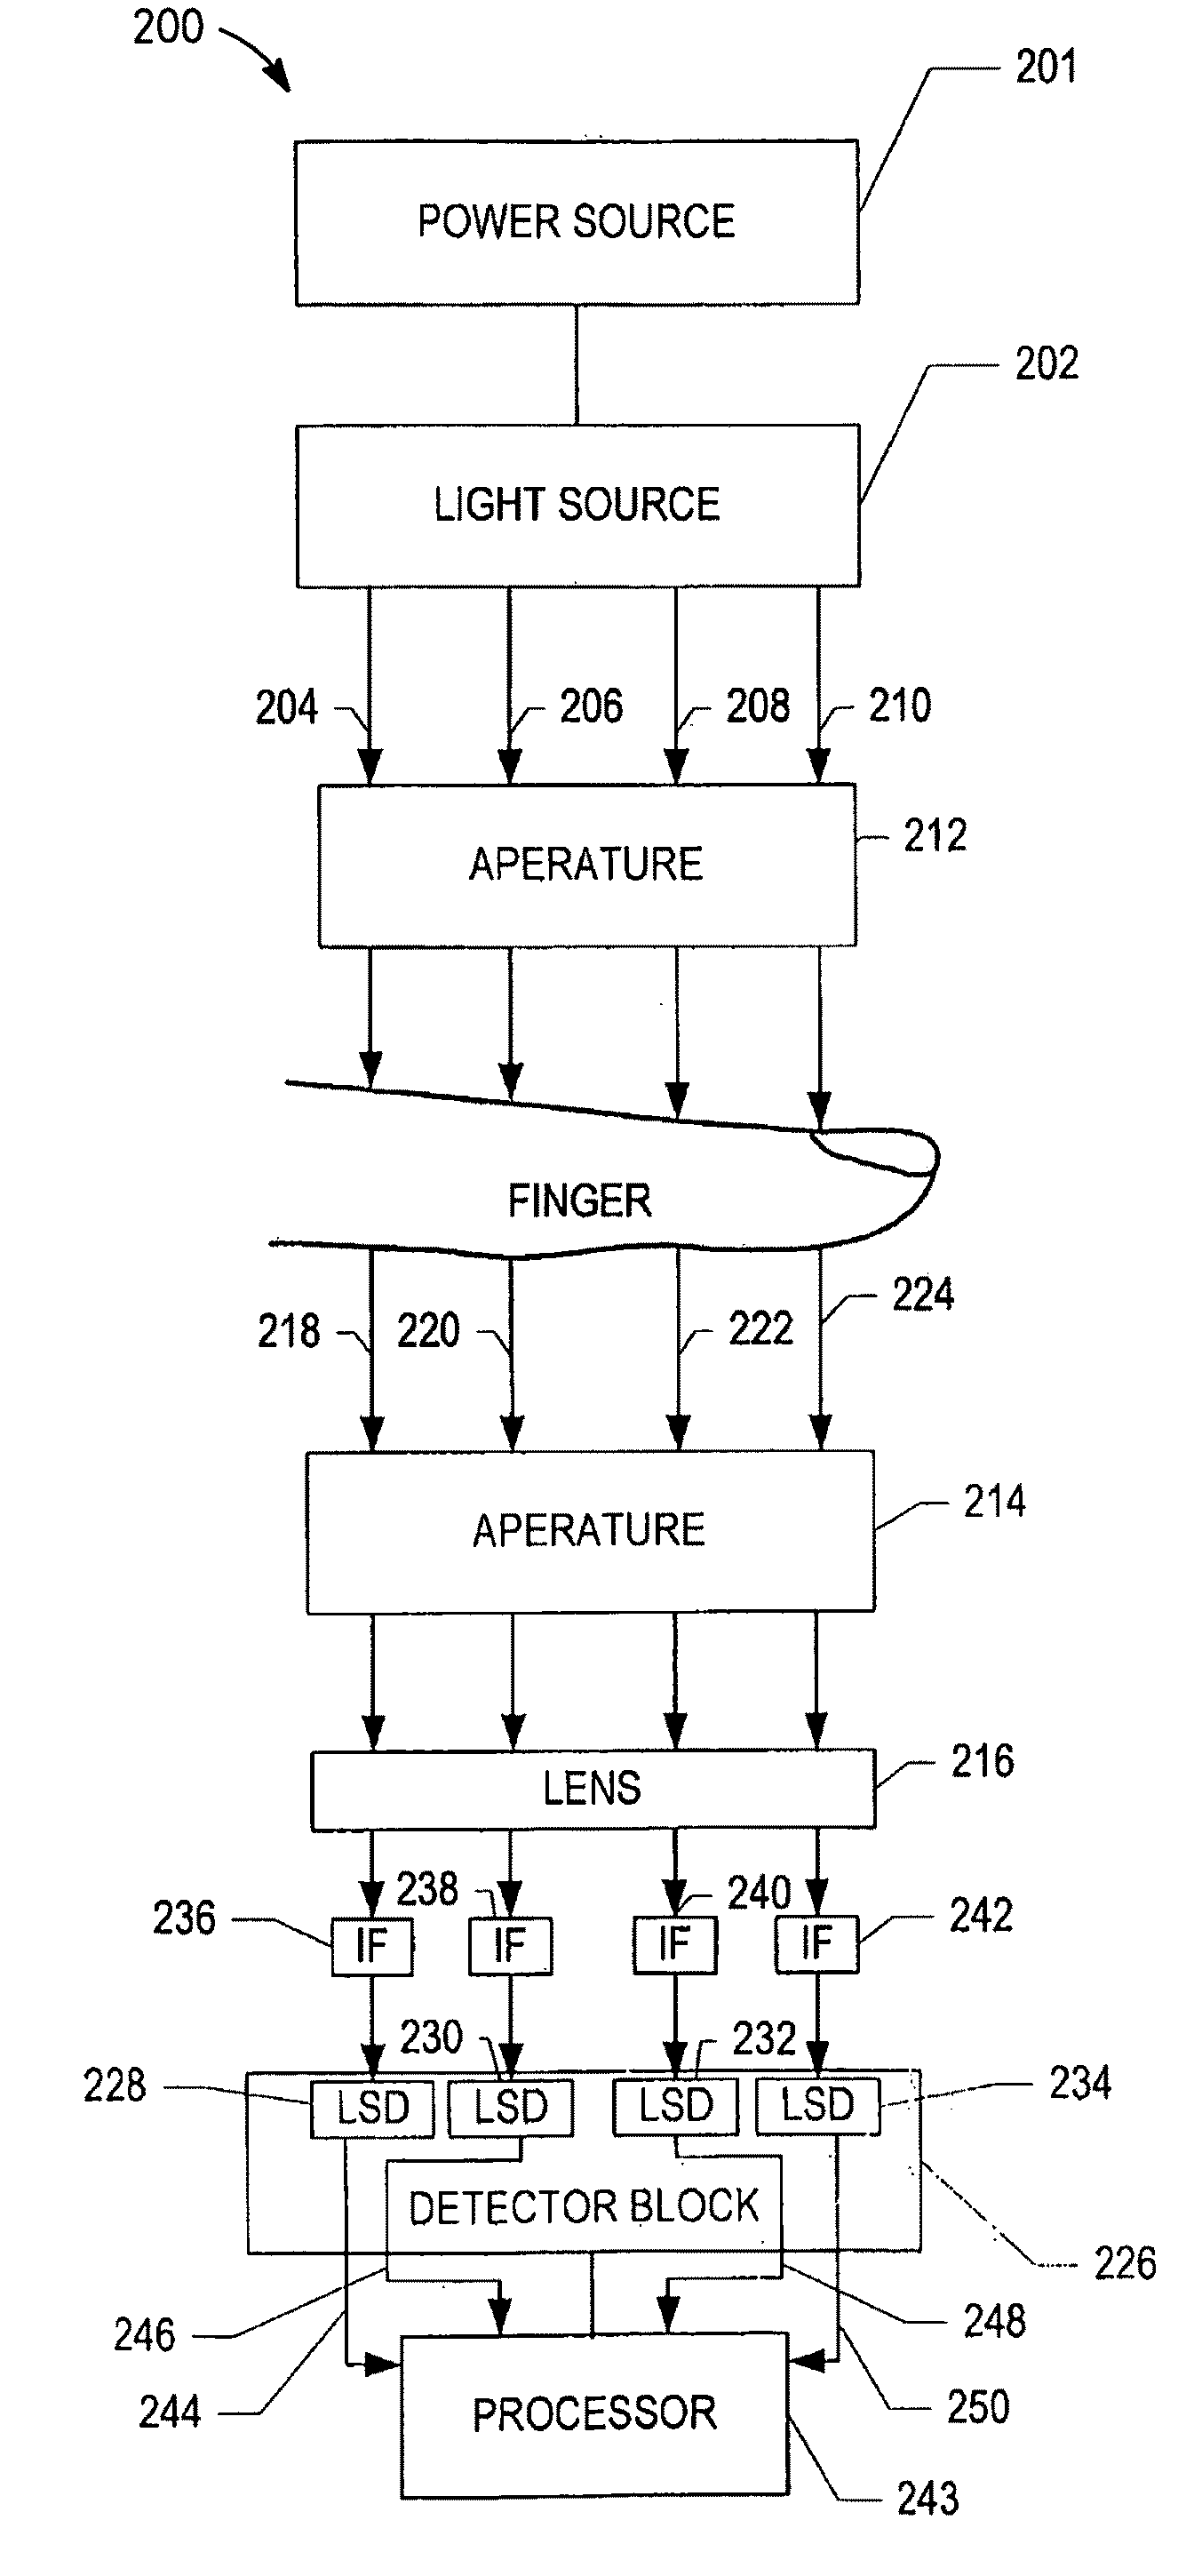 Optical device components